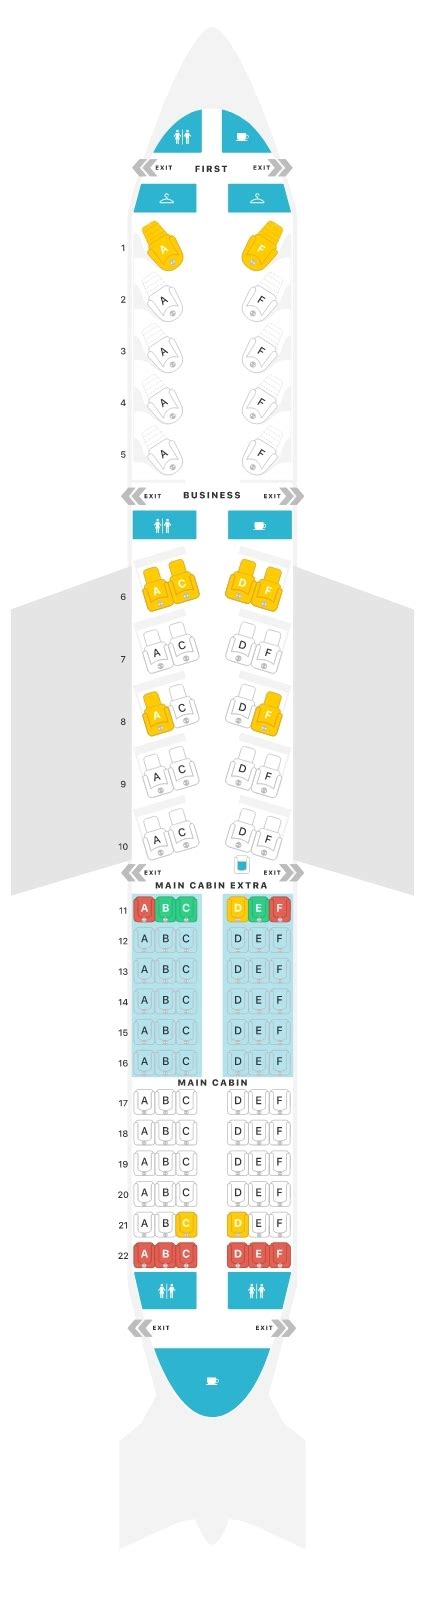 American Airlines A Seat Map Overview Airportix